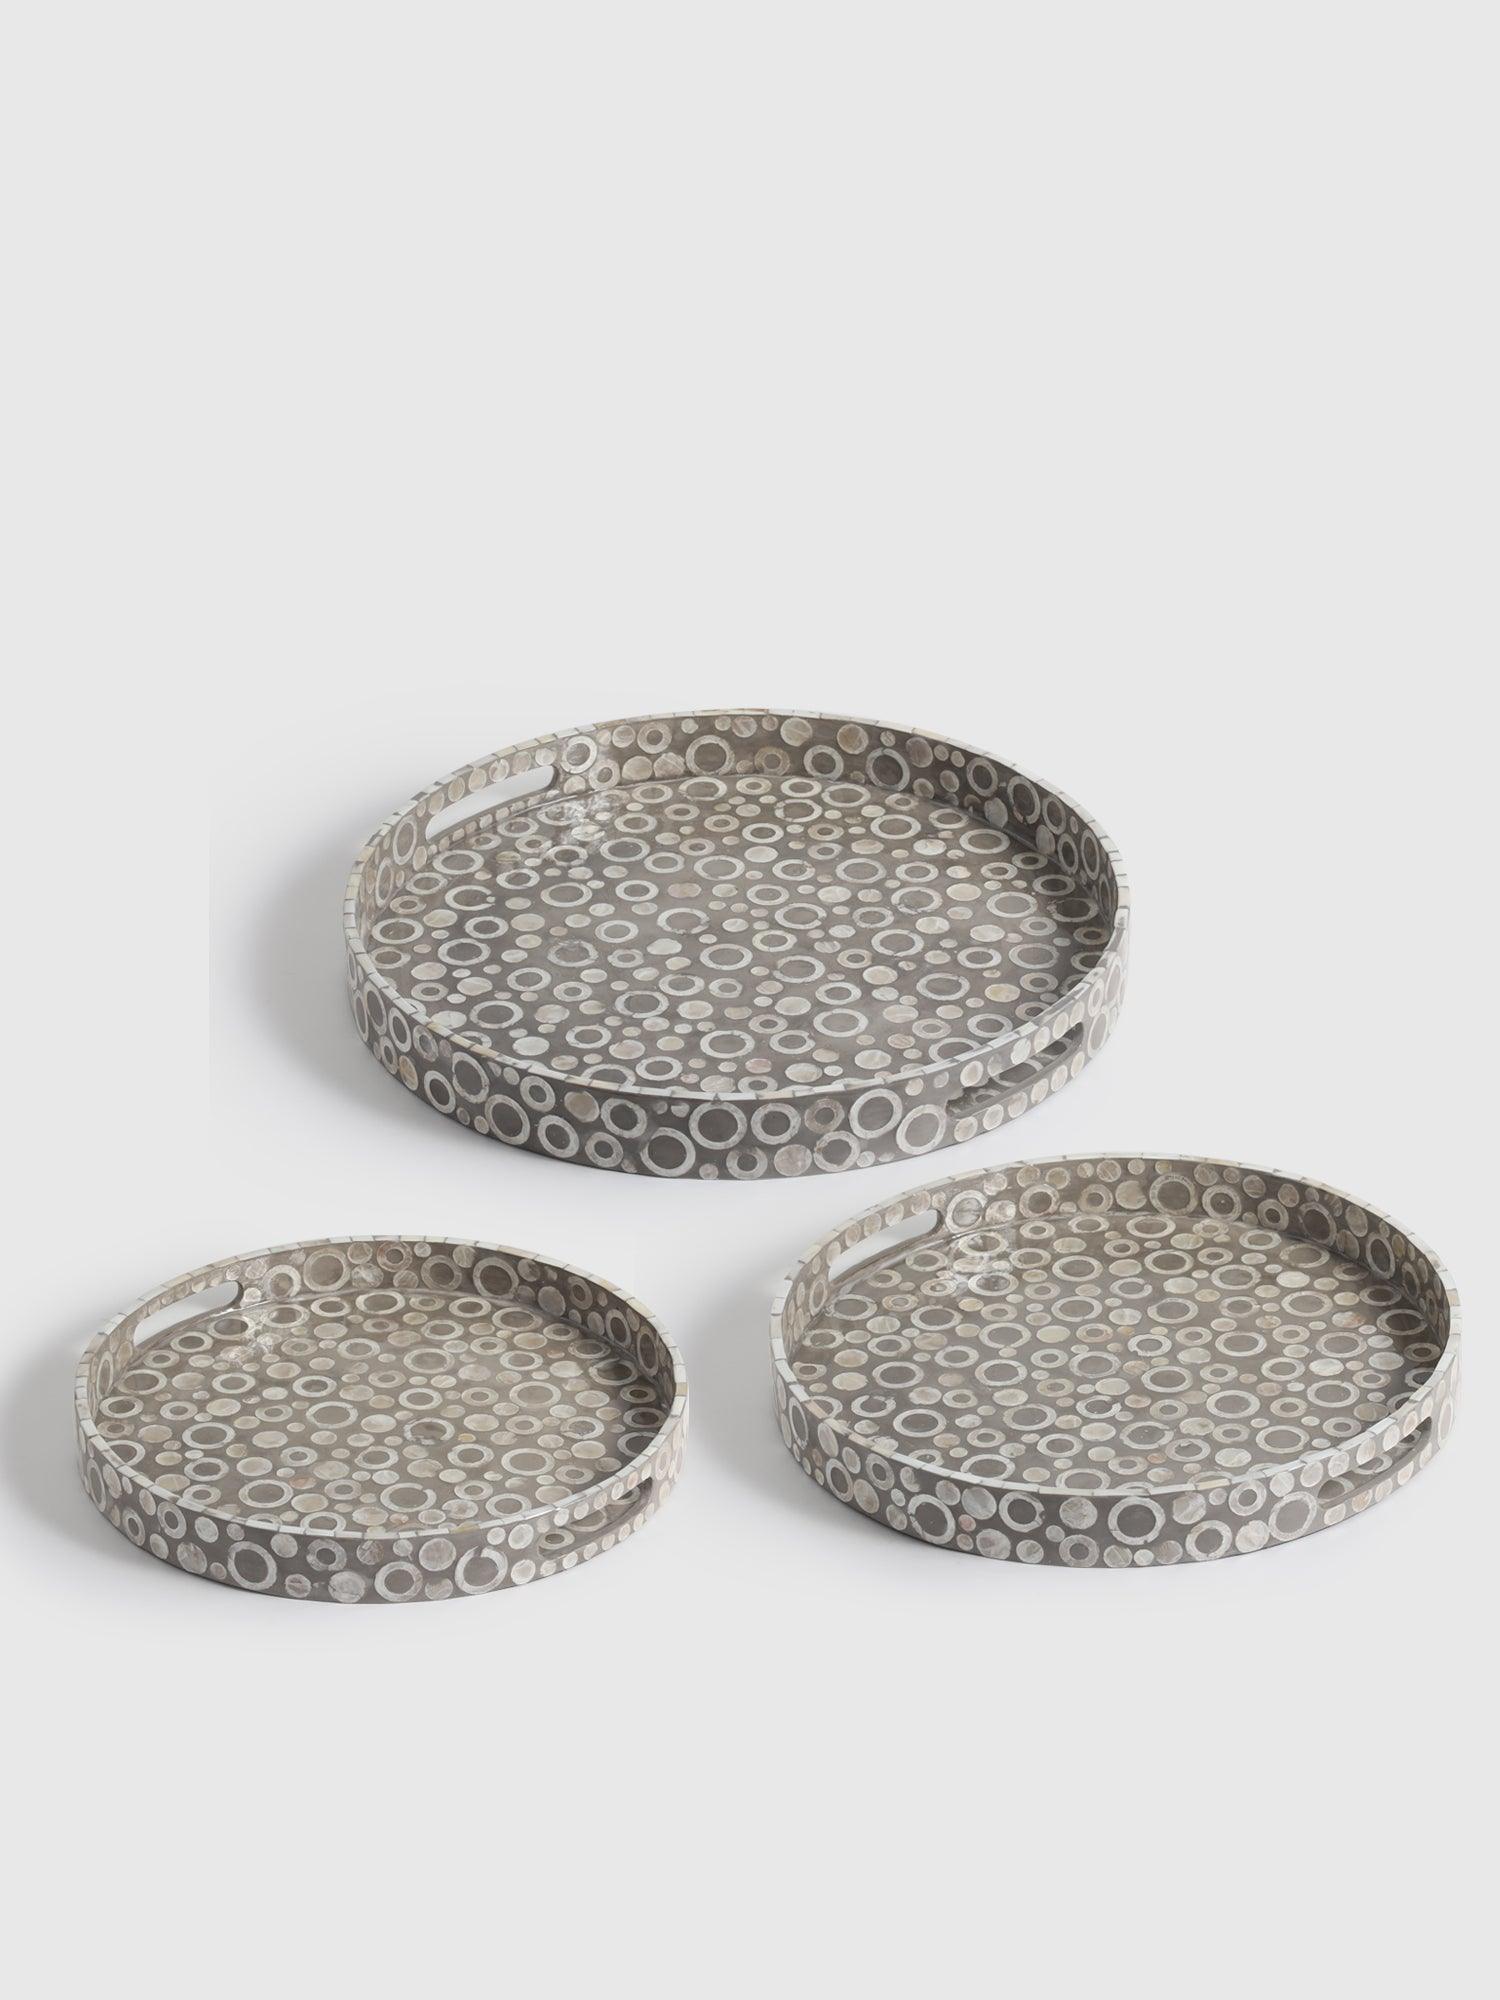 Kass Pearl Tray set of 3 - Living Shapes